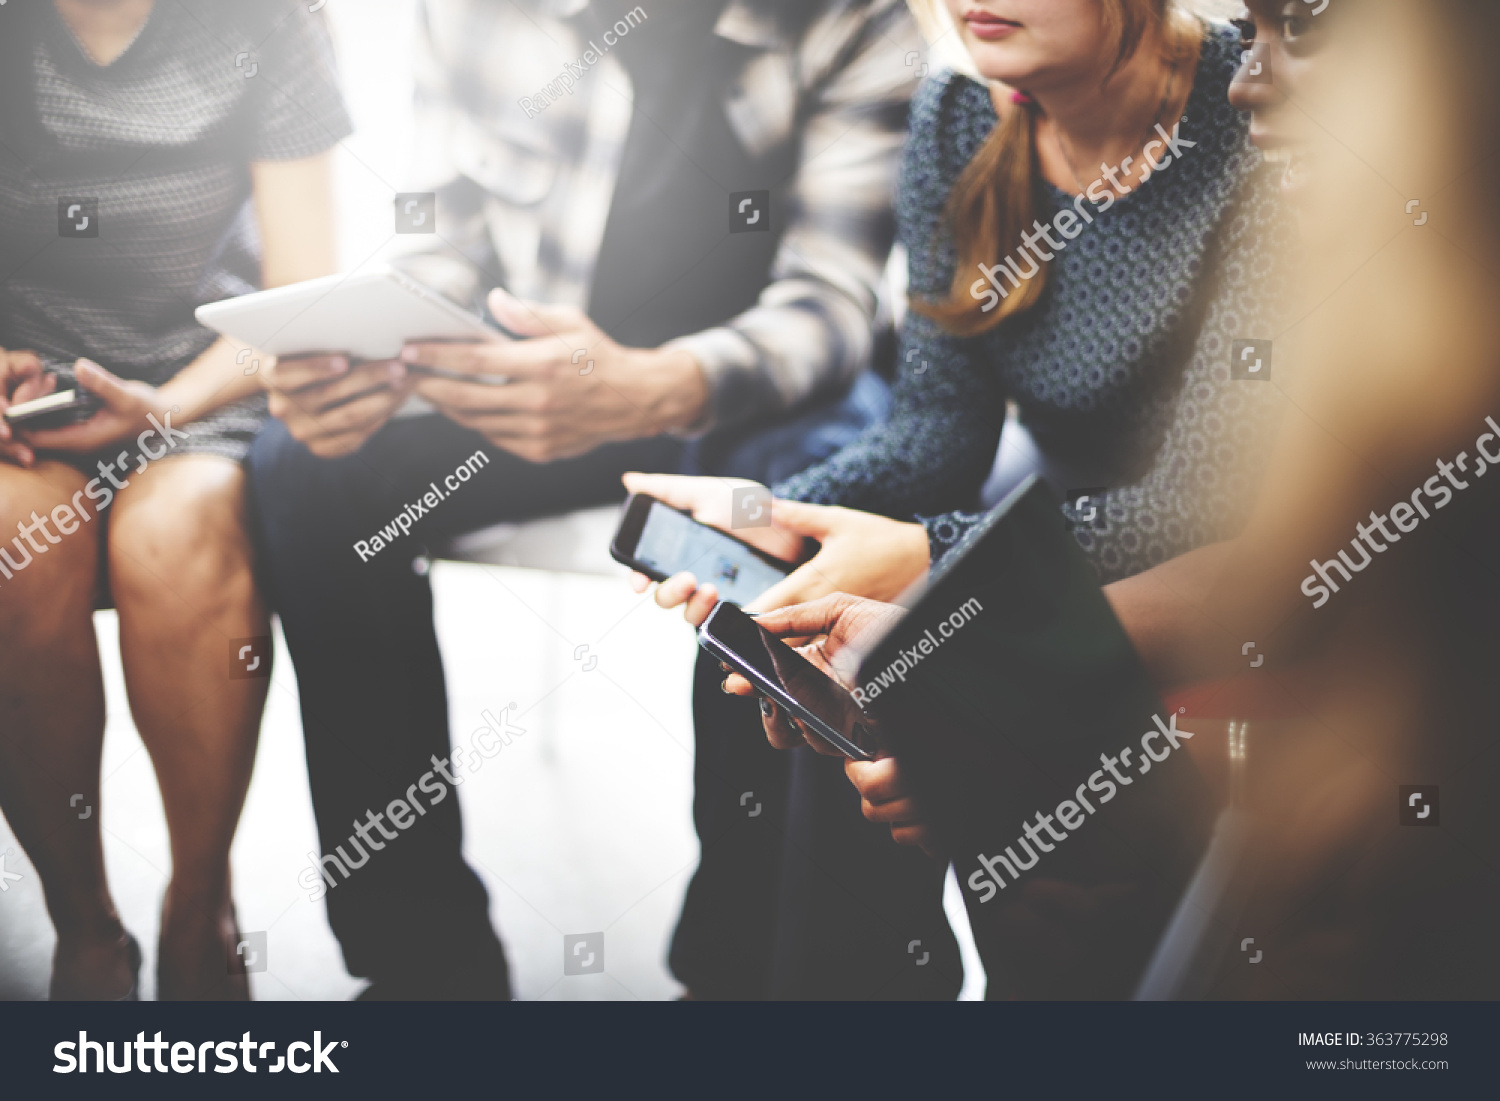 Business Team Digital Device Technology Connecting Concept #363775298